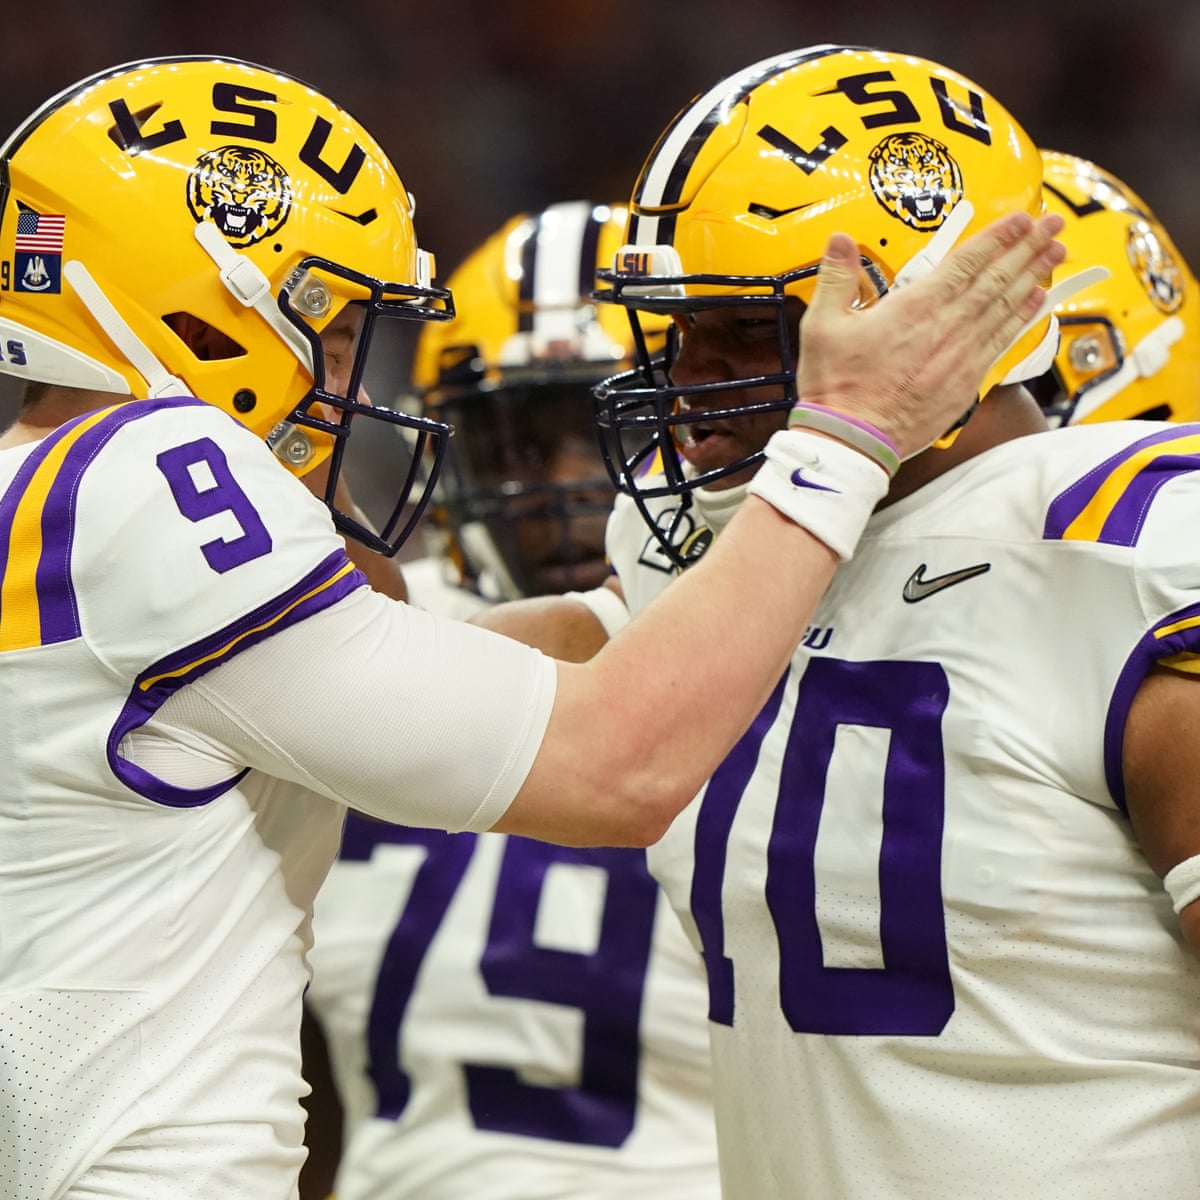 LSU's Burrow bounces back from huge hit, leads Tigers to Fiesta Bowl win